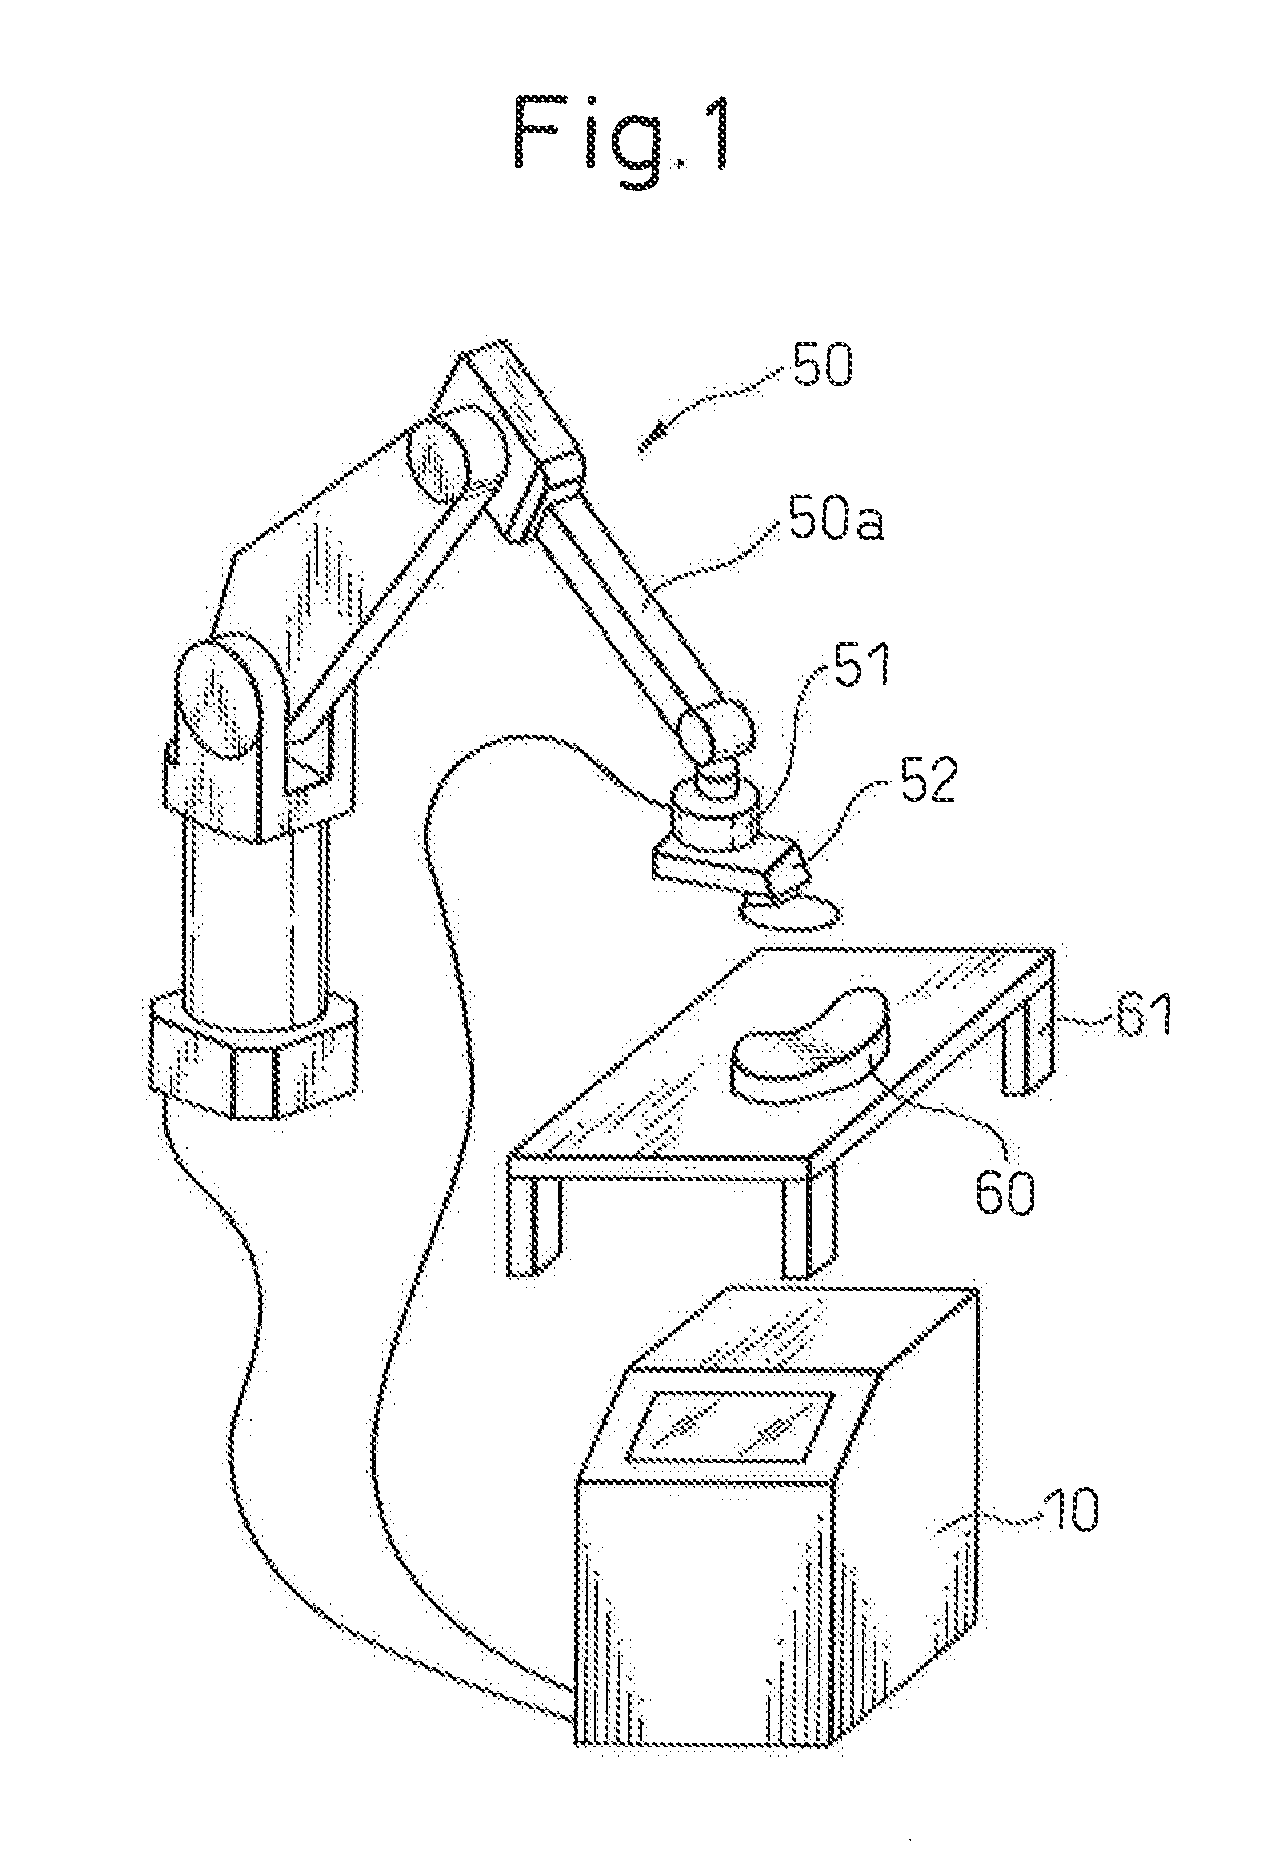 Robot control apparatus for force control